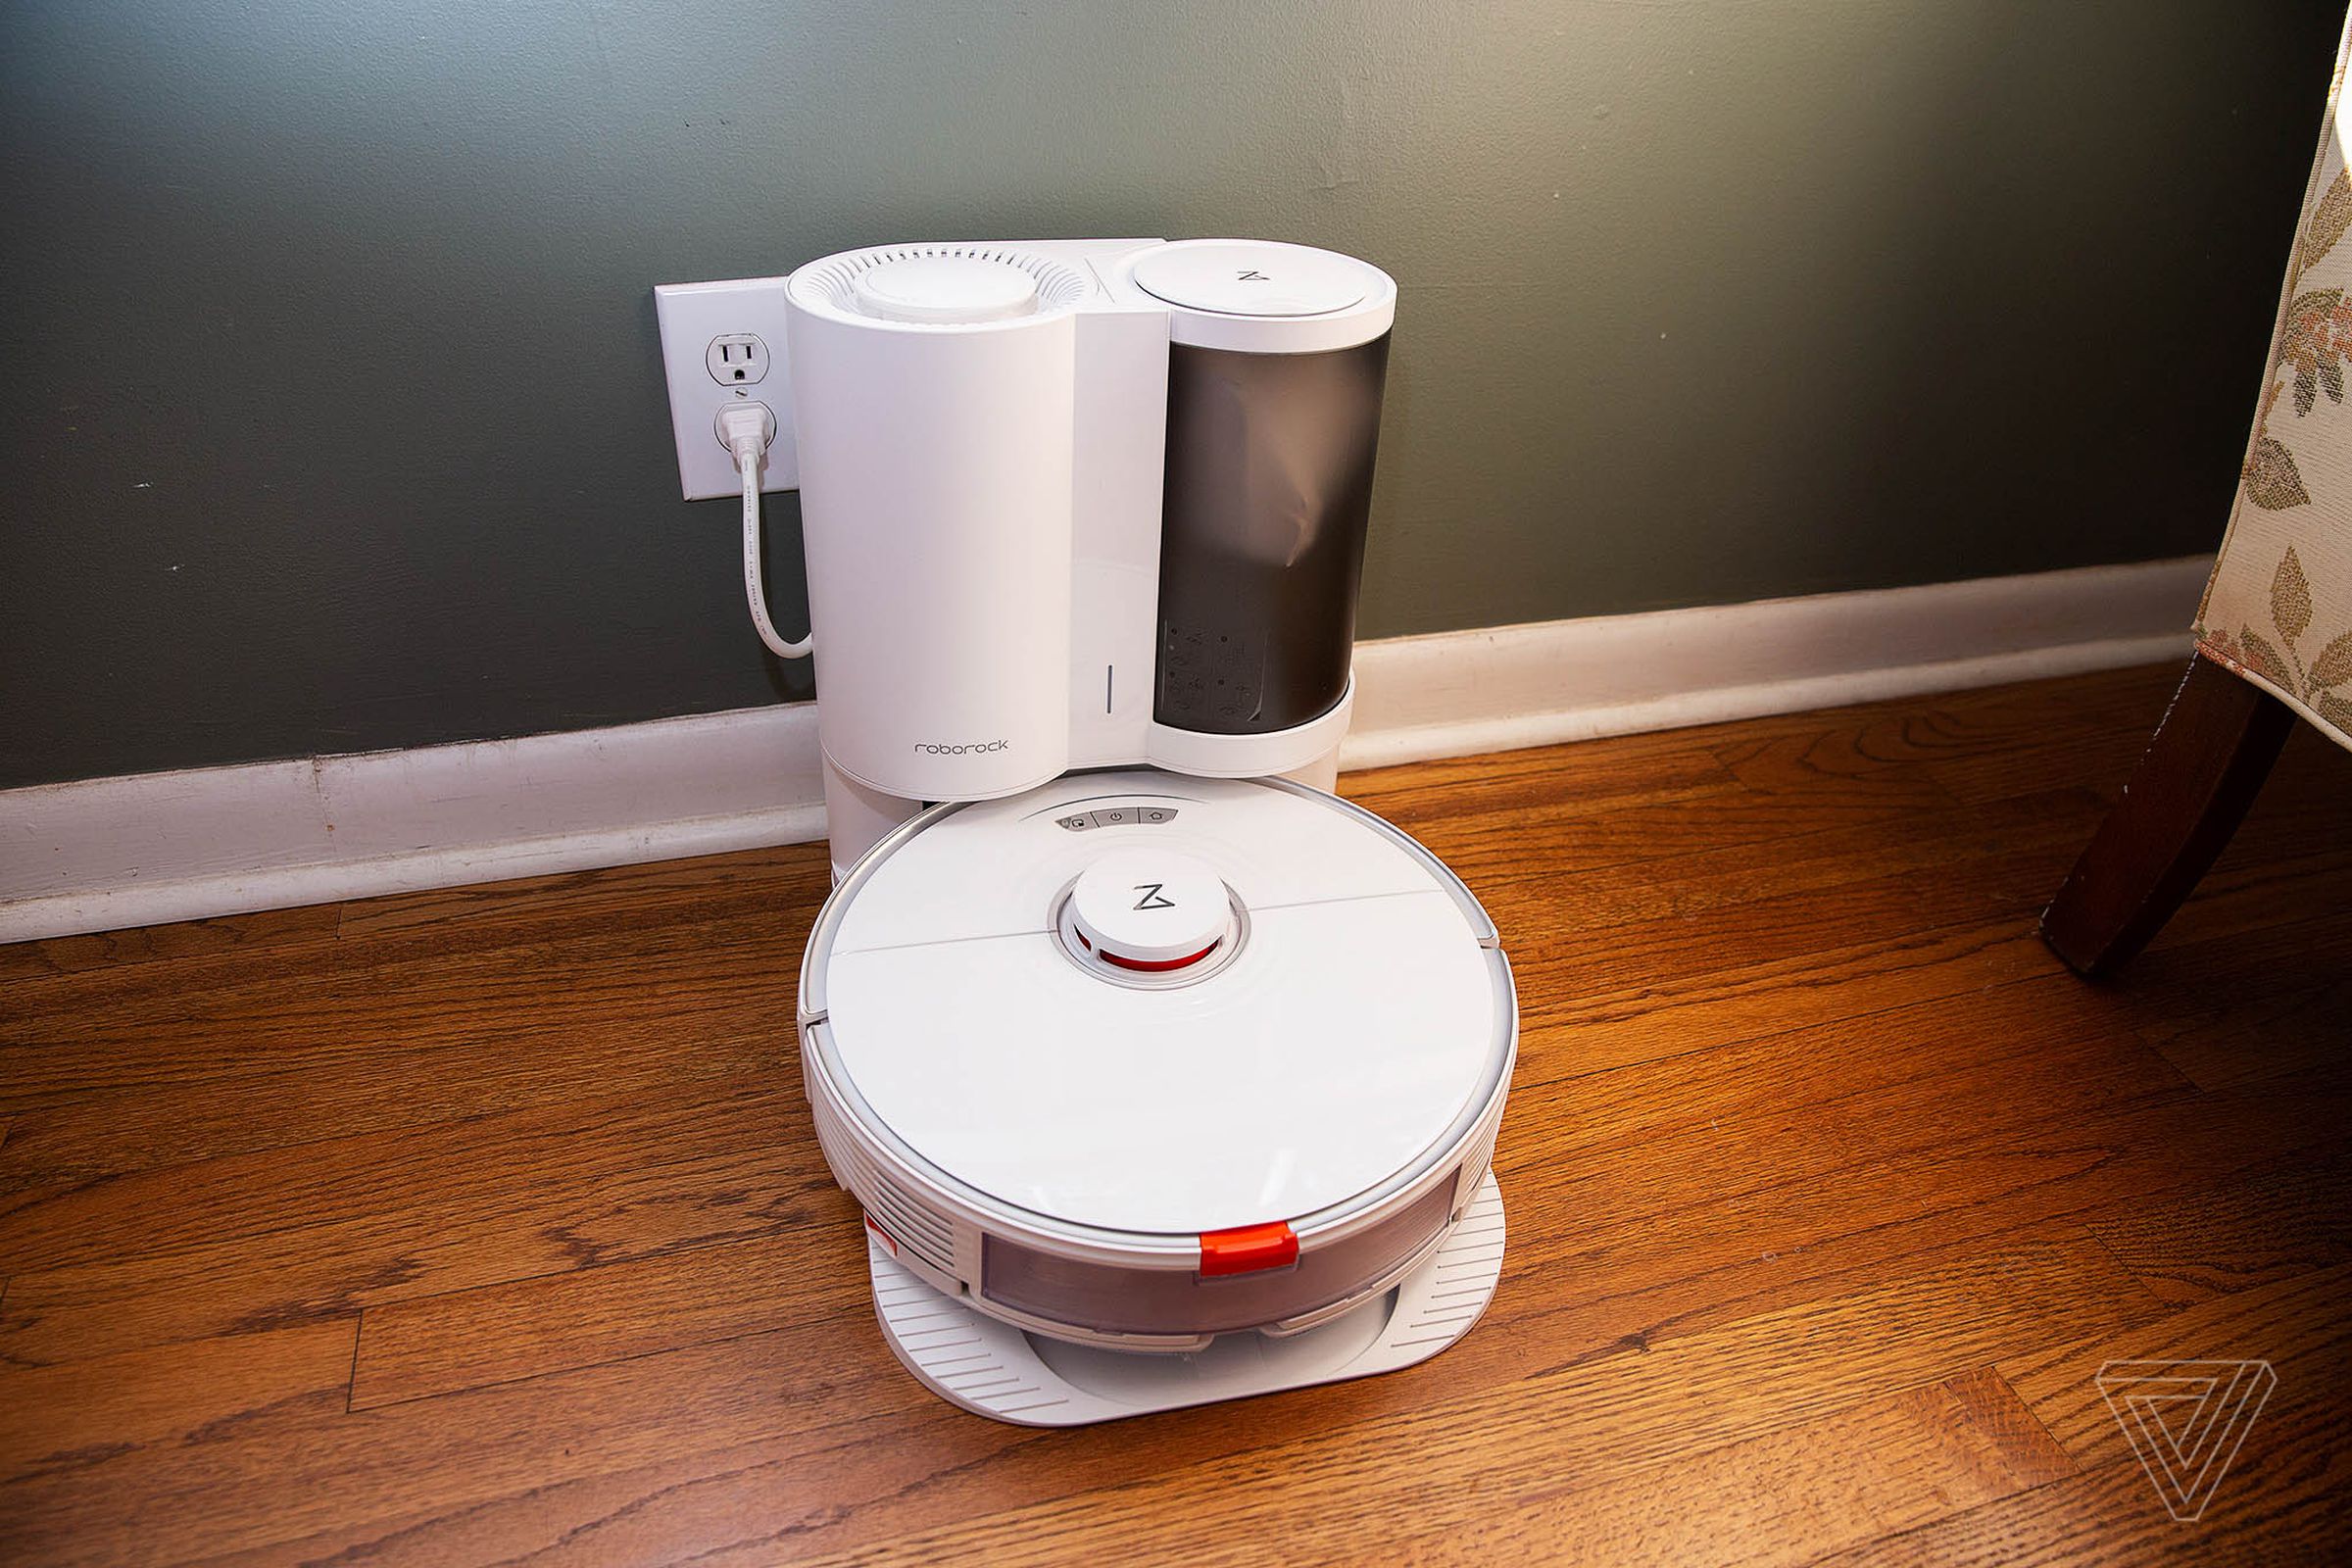 An image of Roborock’s S7 Plus robot vacuum on its charging stand.